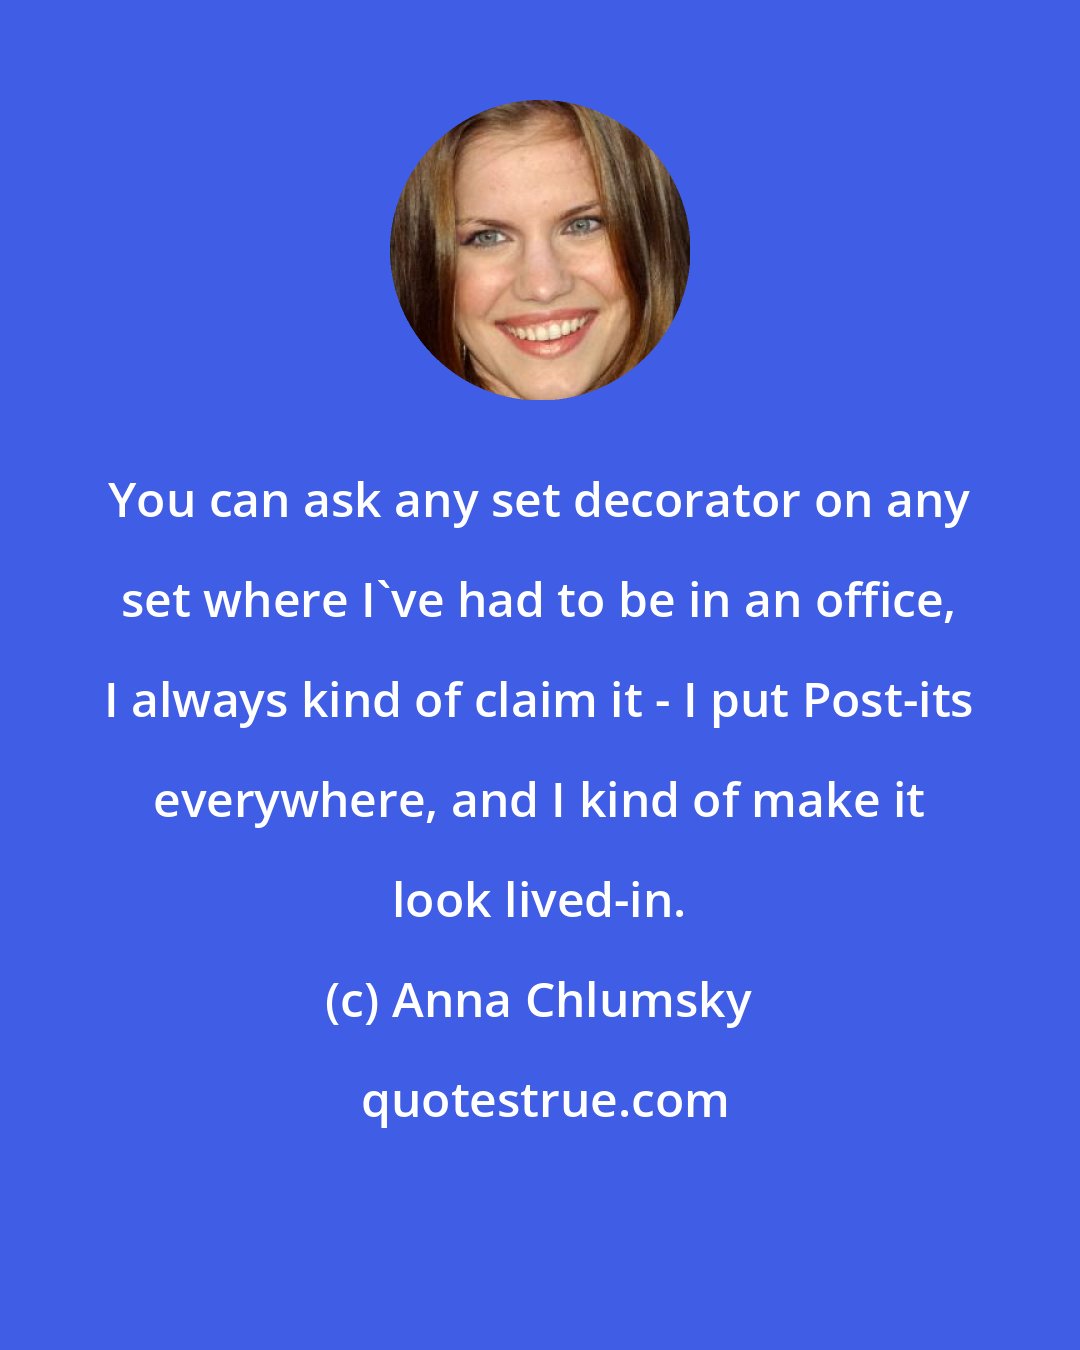 Anna Chlumsky: You can ask any set decorator on any set where I've had to be in an office, I always kind of claim it - I put Post-its everywhere, and I kind of make it look lived-in.